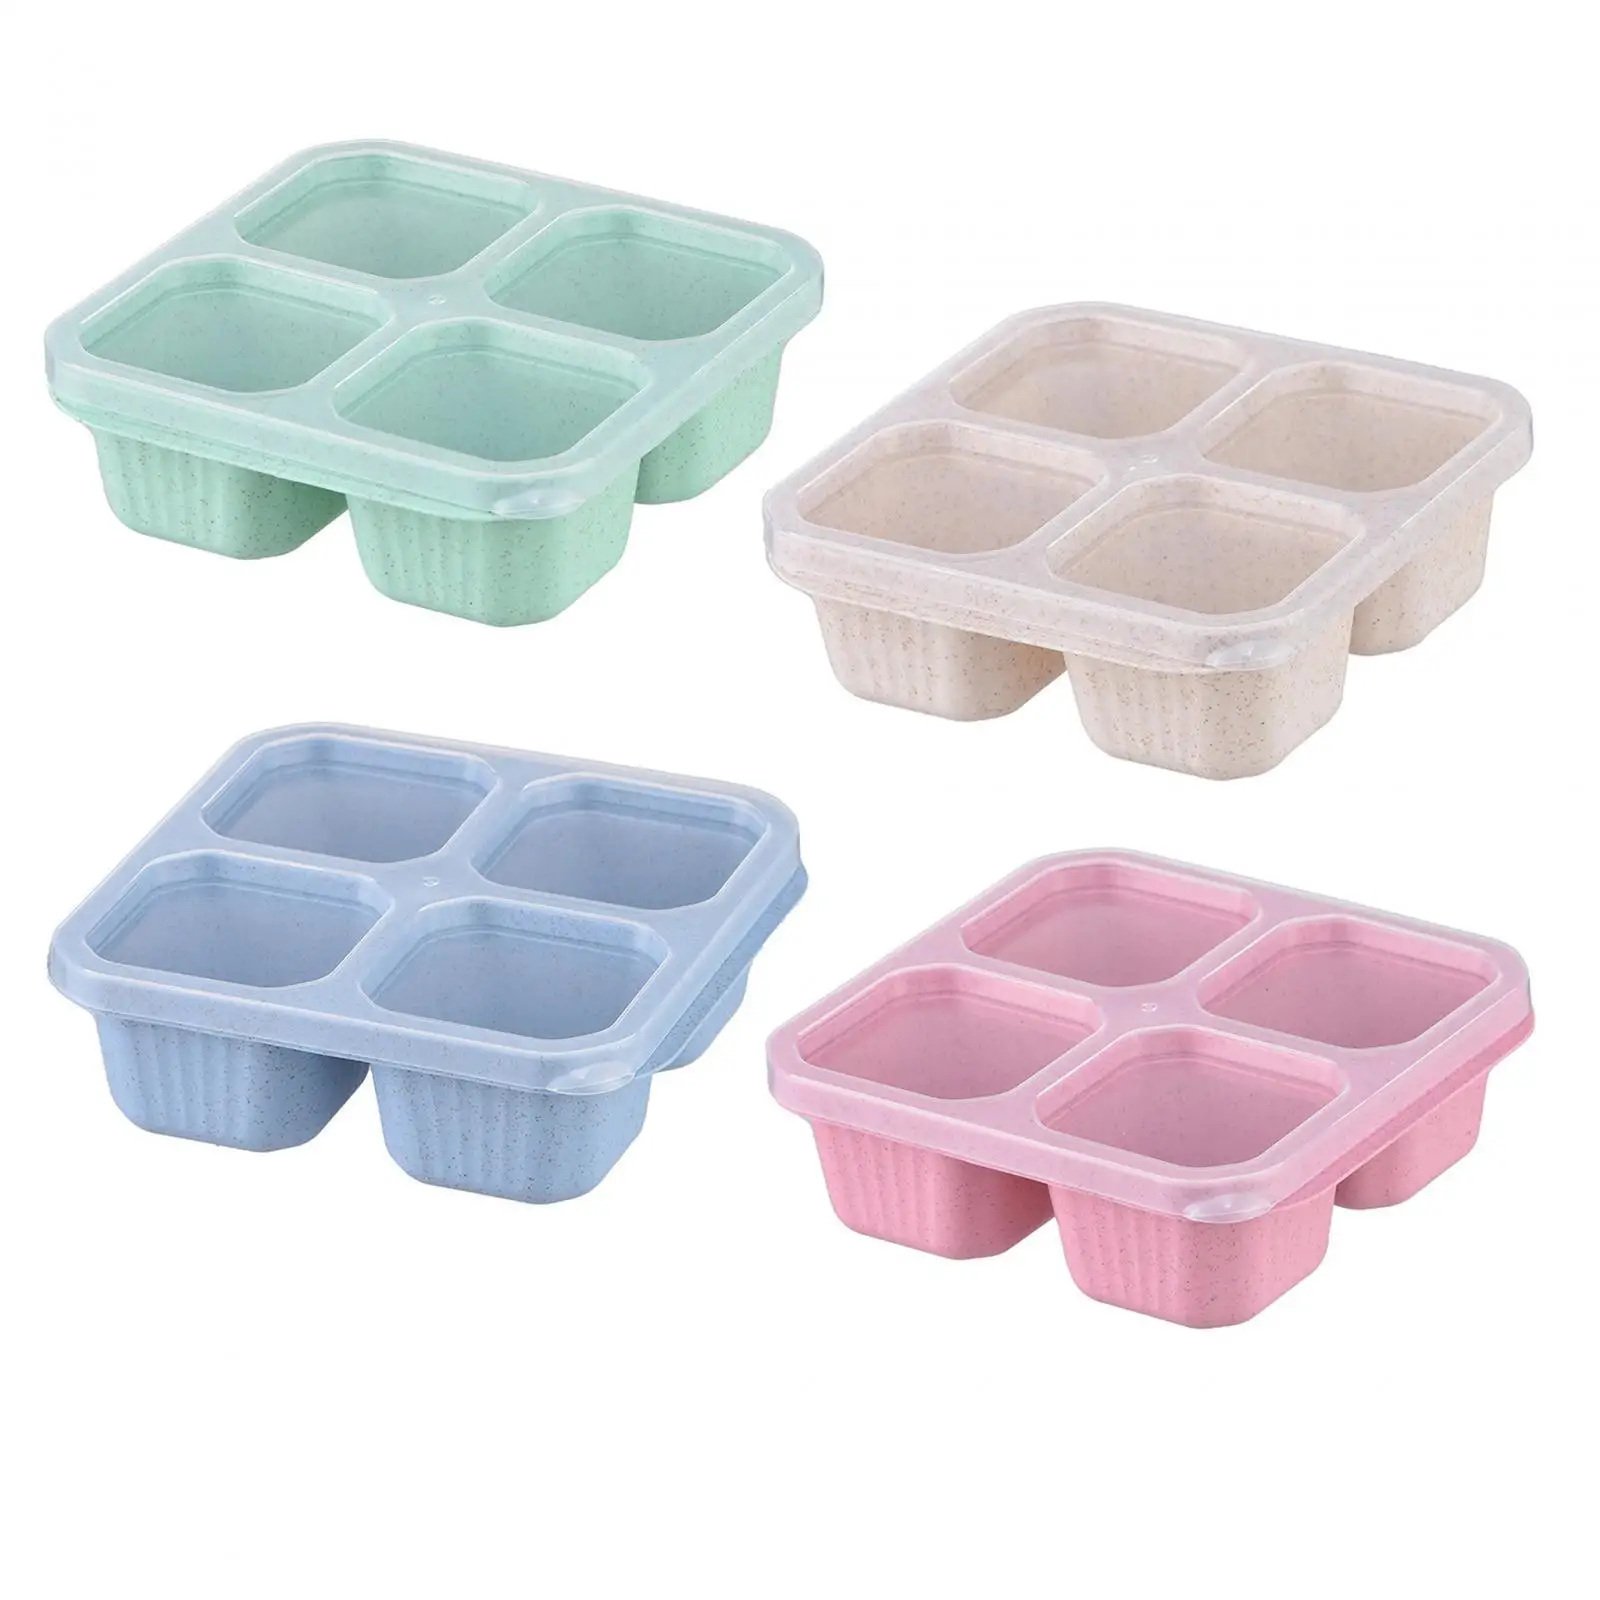 Bento Snack Box Travel Work Divided Serving Tray 4 Compartment Containers for Chocolate Candy Dessert Sandwich Dried Fruits